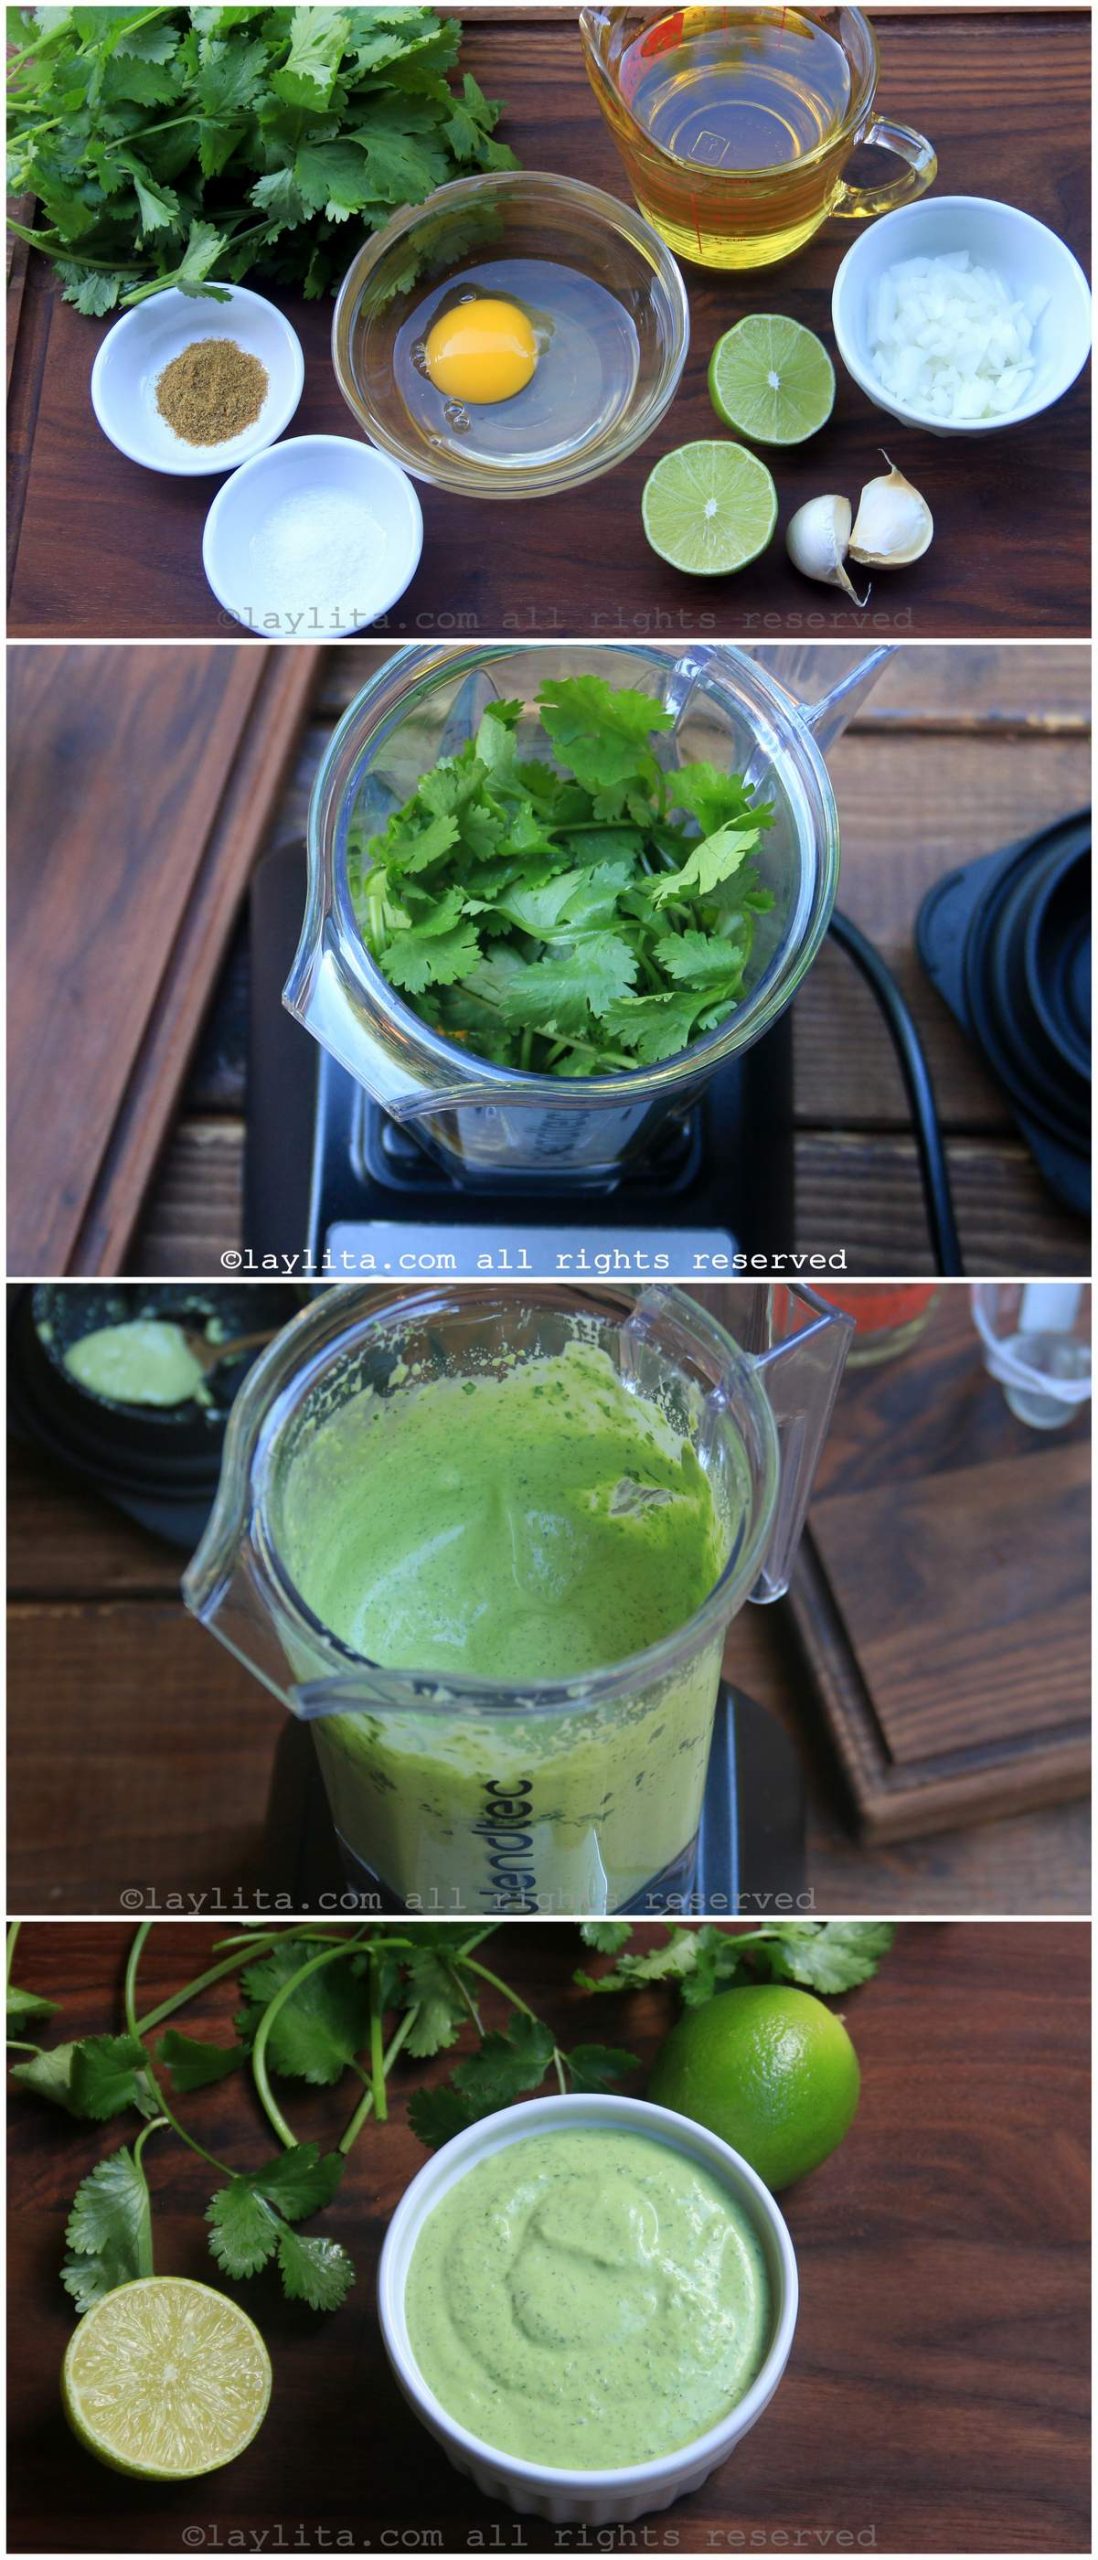 Ingredients and step by step photos for cilantro aioli mayonnaise using the blender